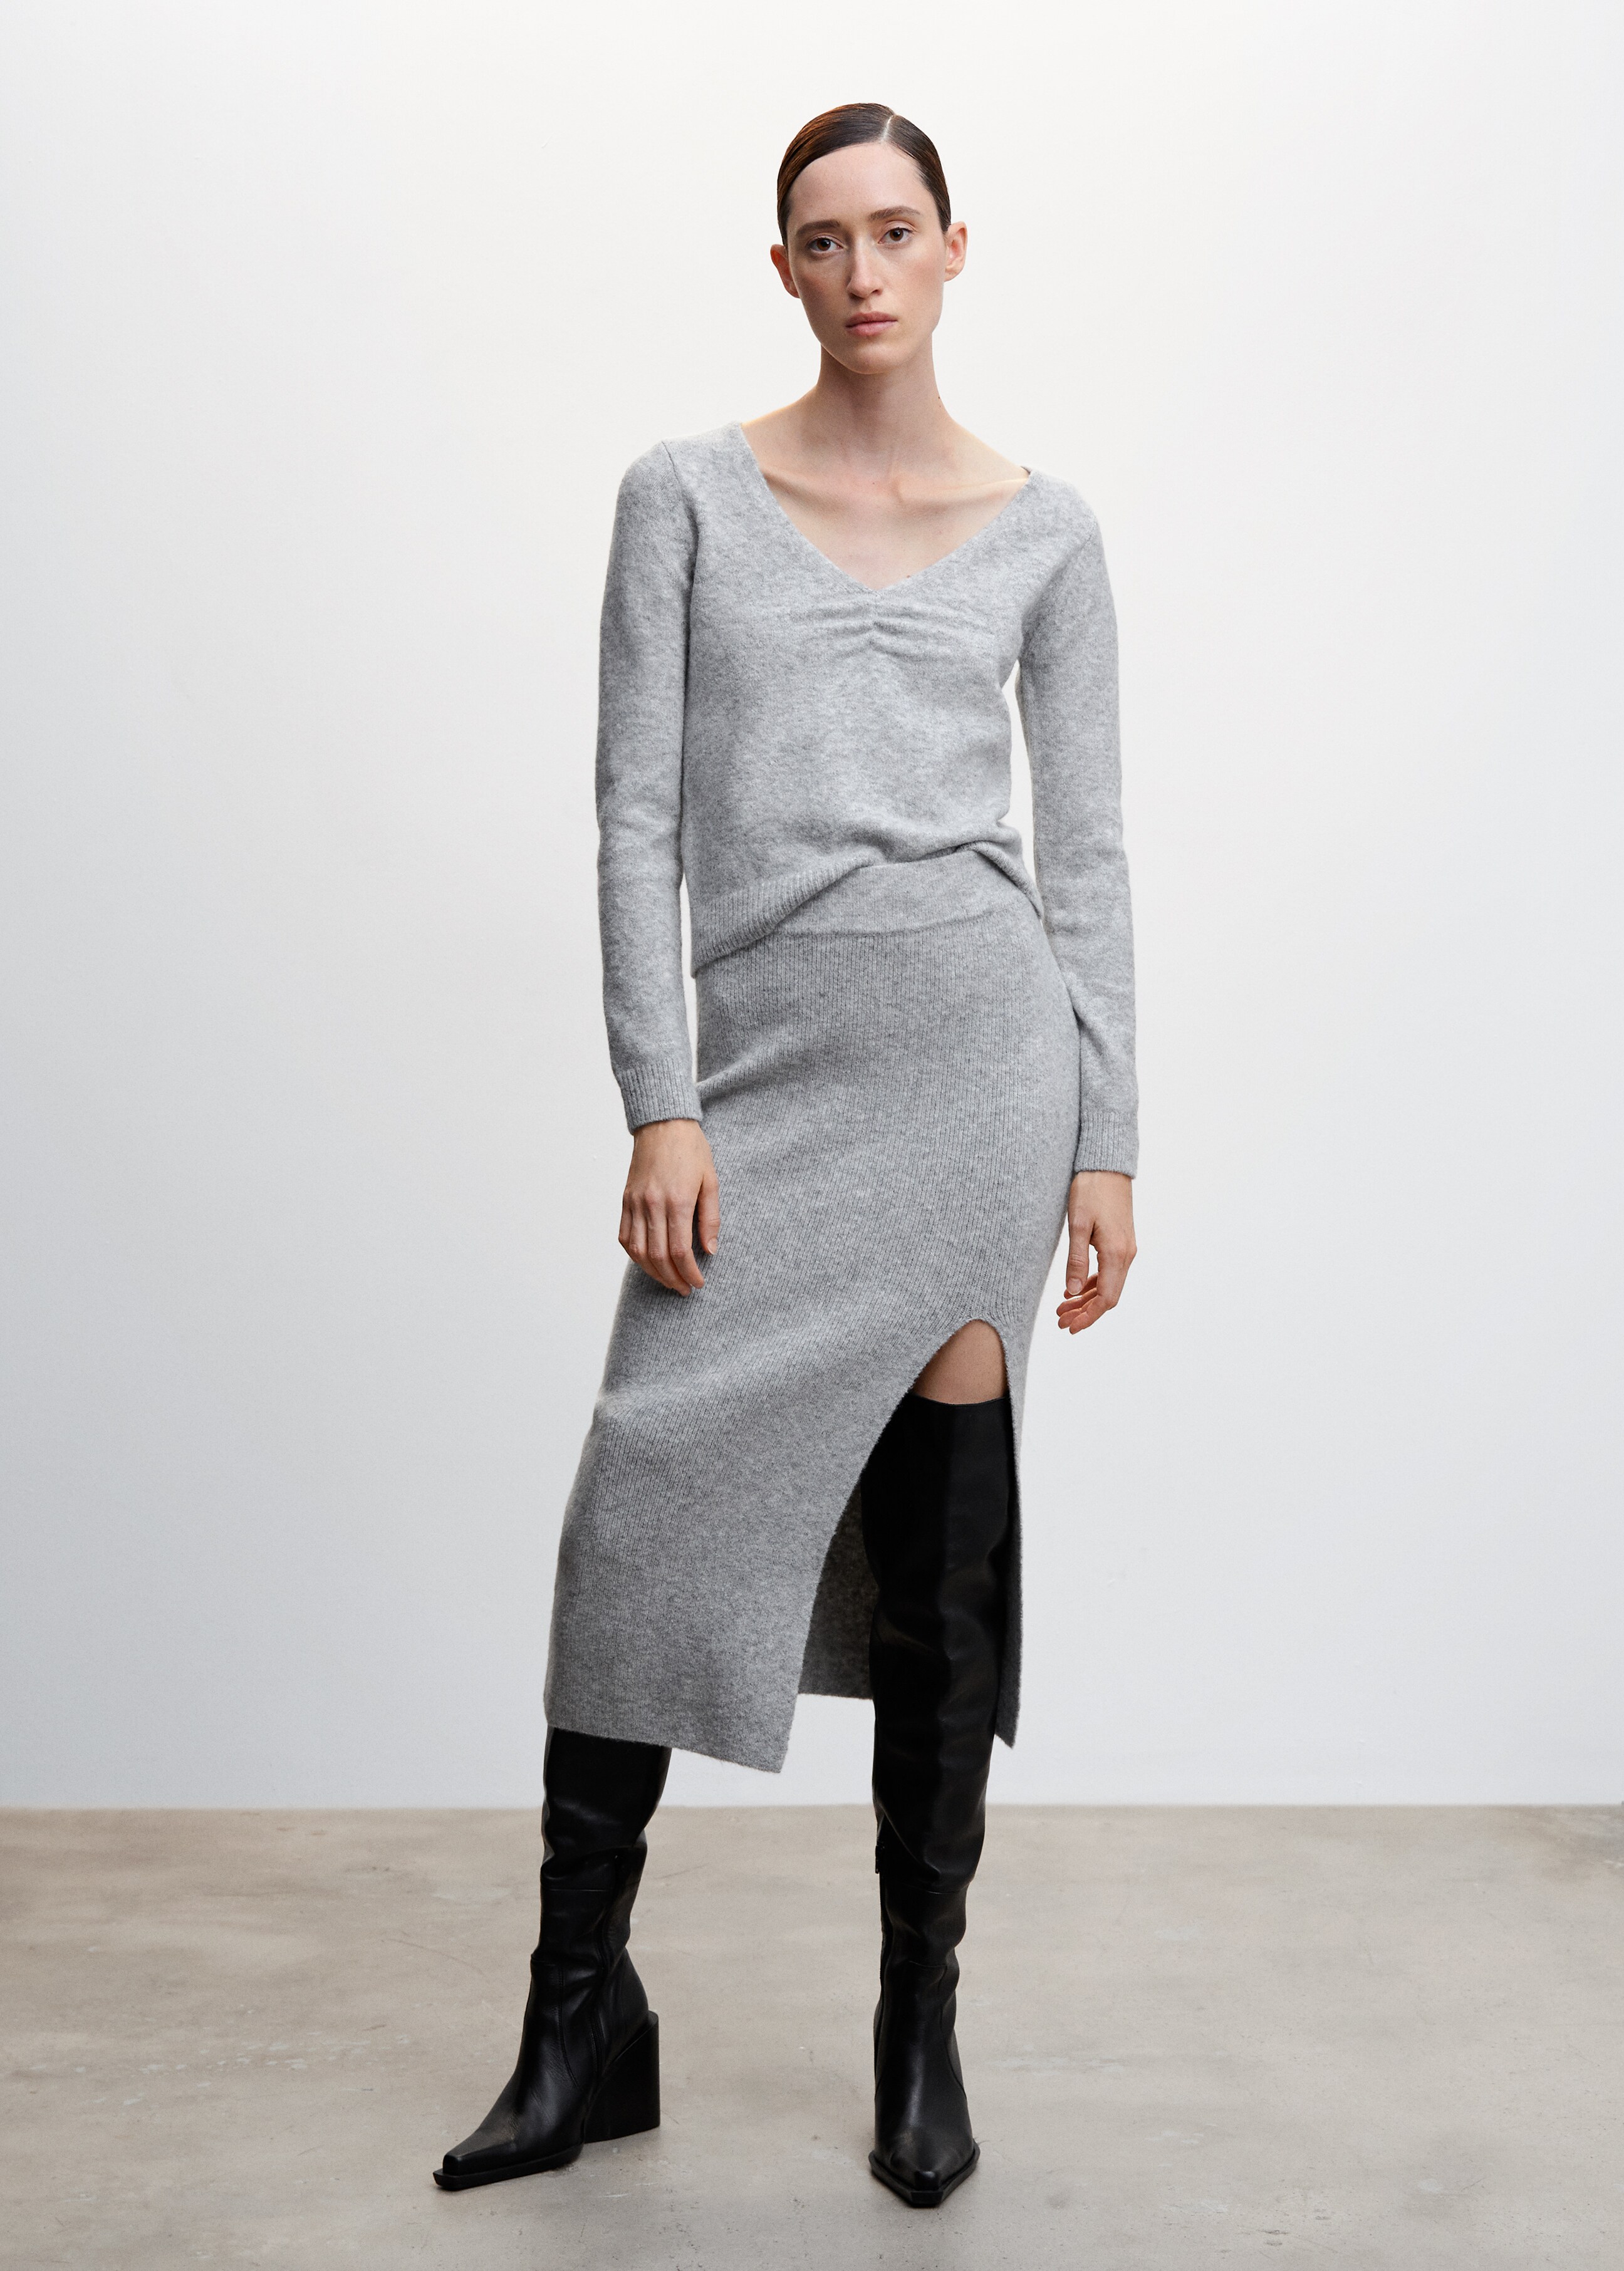 V-neck sweater with ruffled collar - General plane